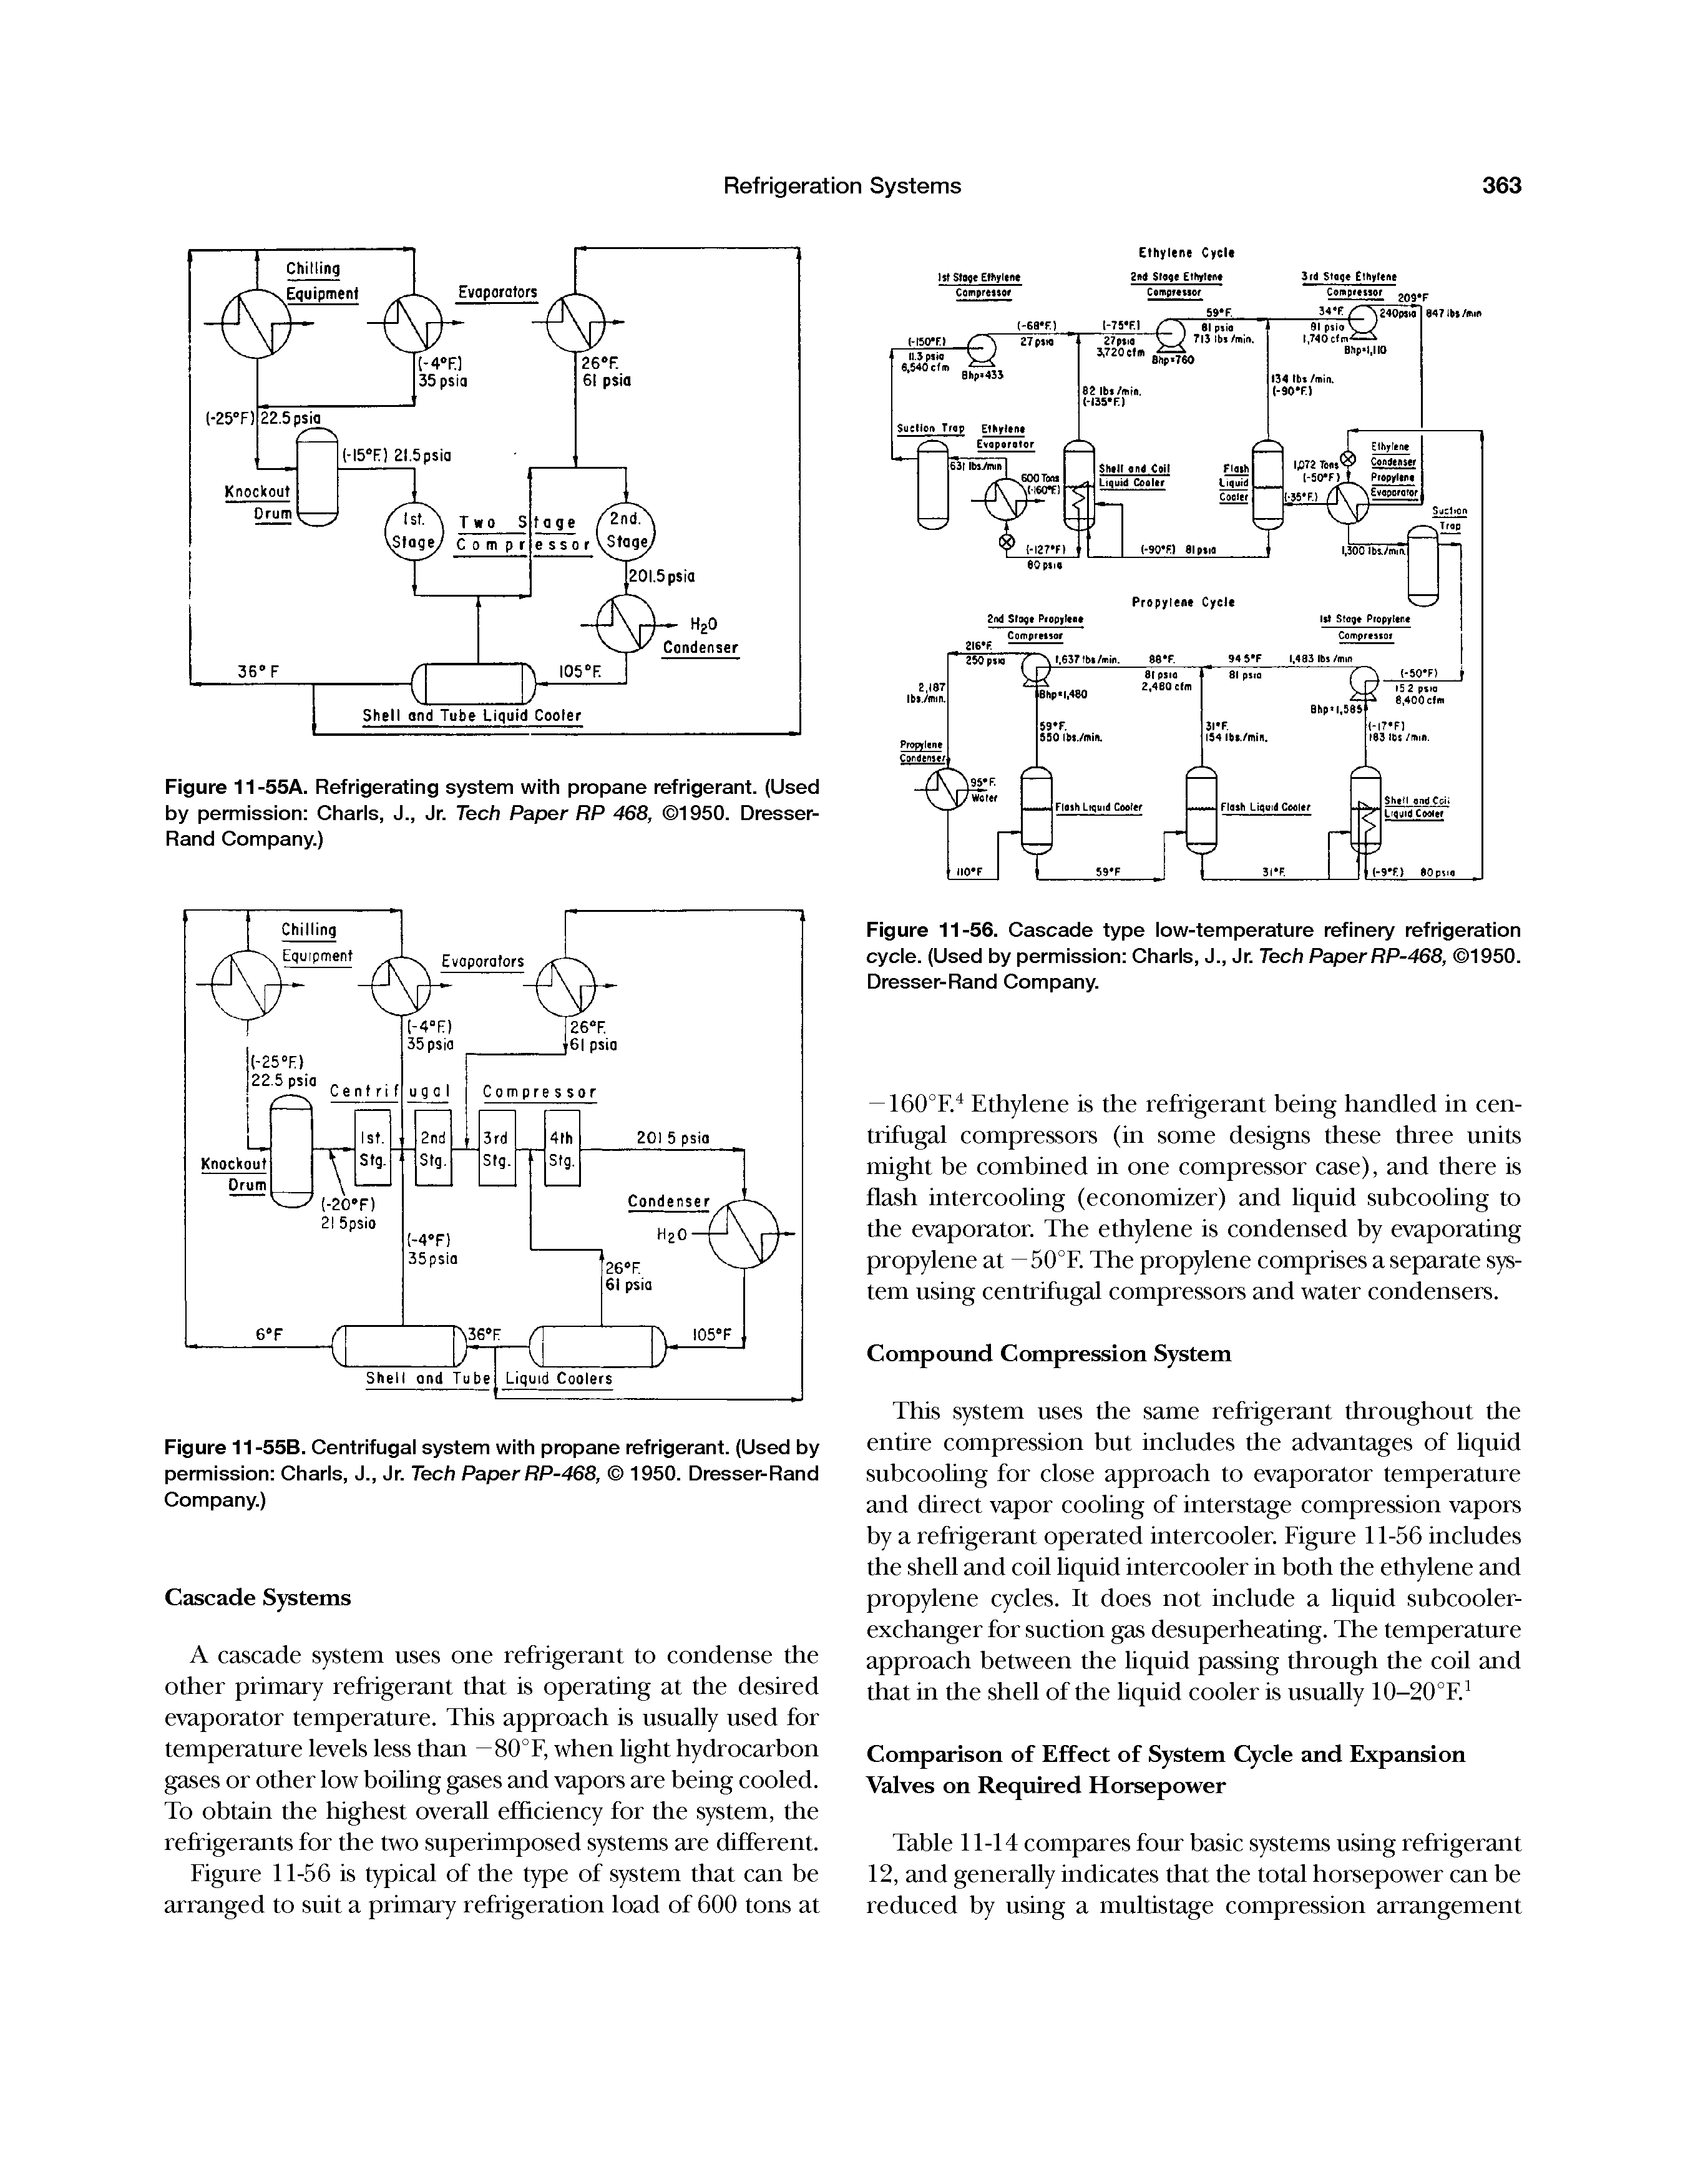 Figure 11-55A. Refrigerating system with propane refrigerant. (Used by permission Chads, J., Jr. Tech Paper RP 468, 1950. Dresser-Rand Company.)...